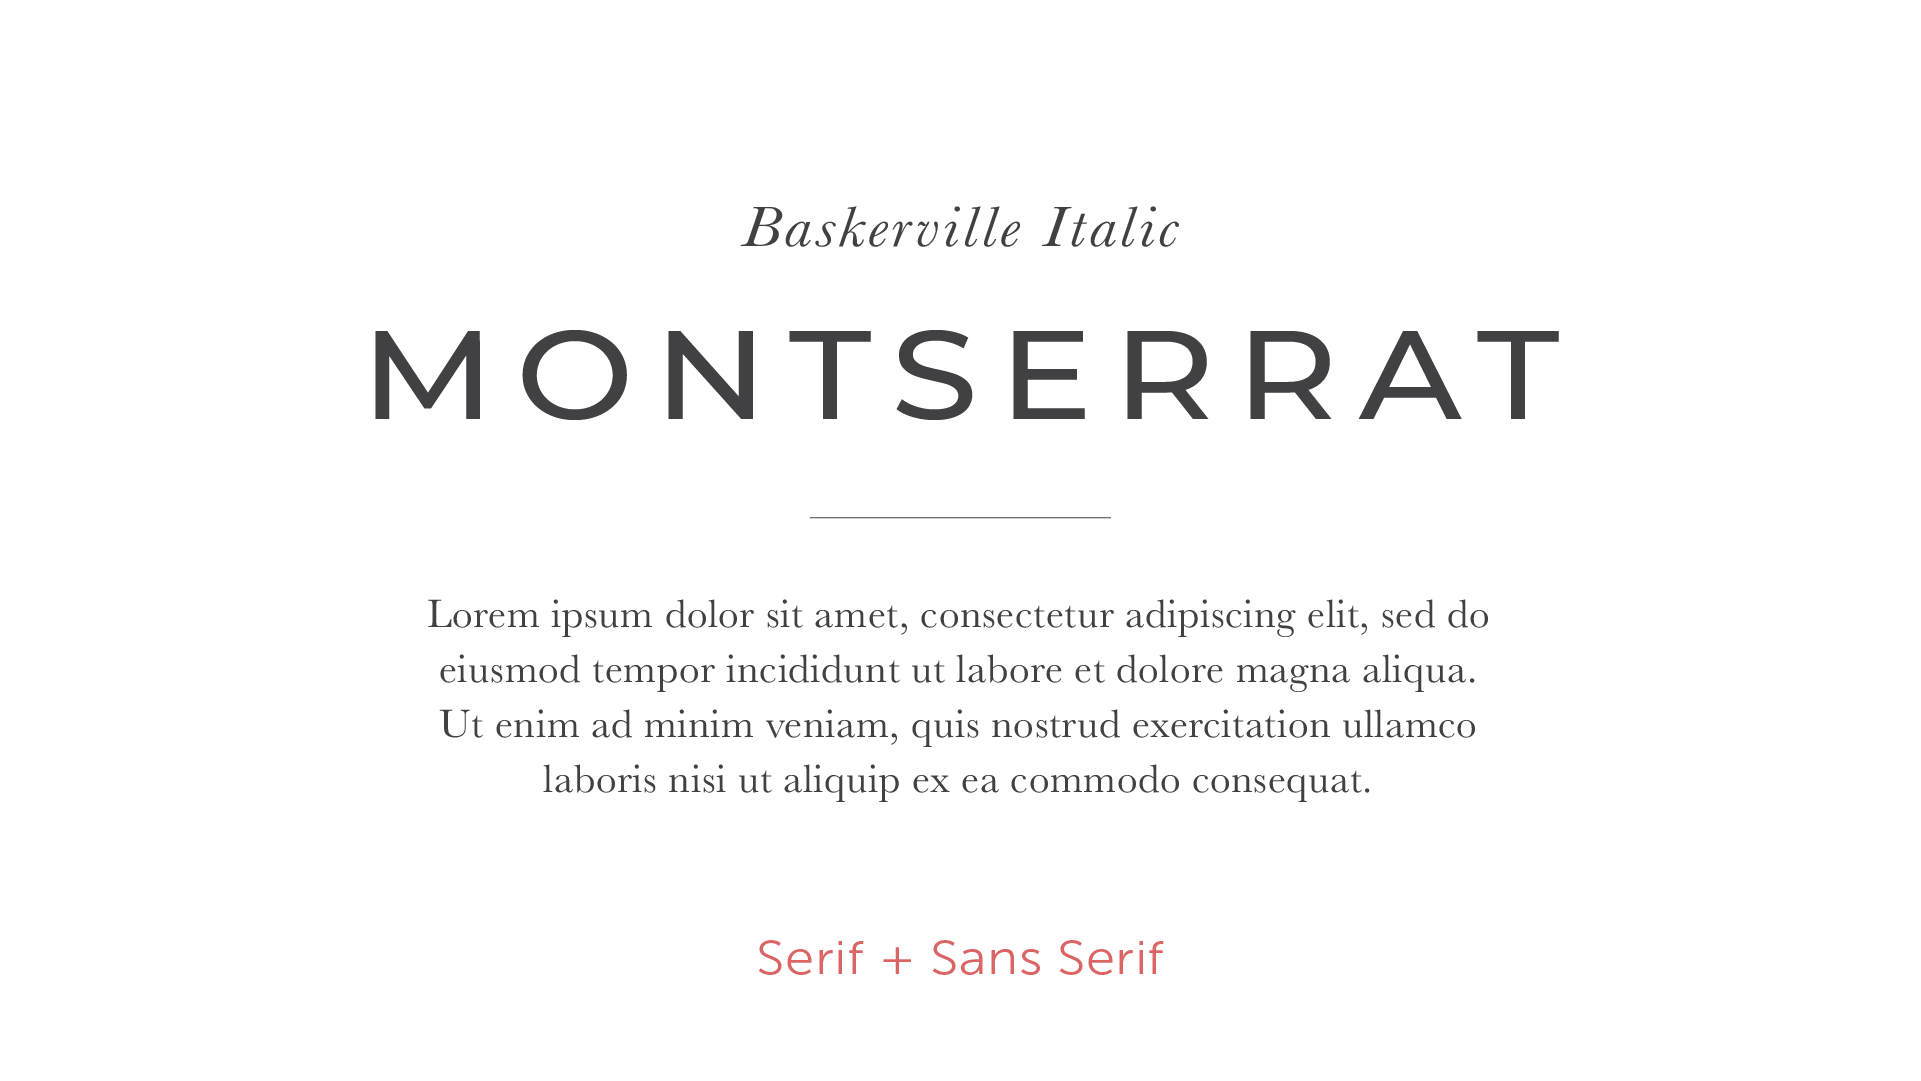 Font System using Baskerville and Montserrat - Beginner's Guide to Typography - AllieMarie Design